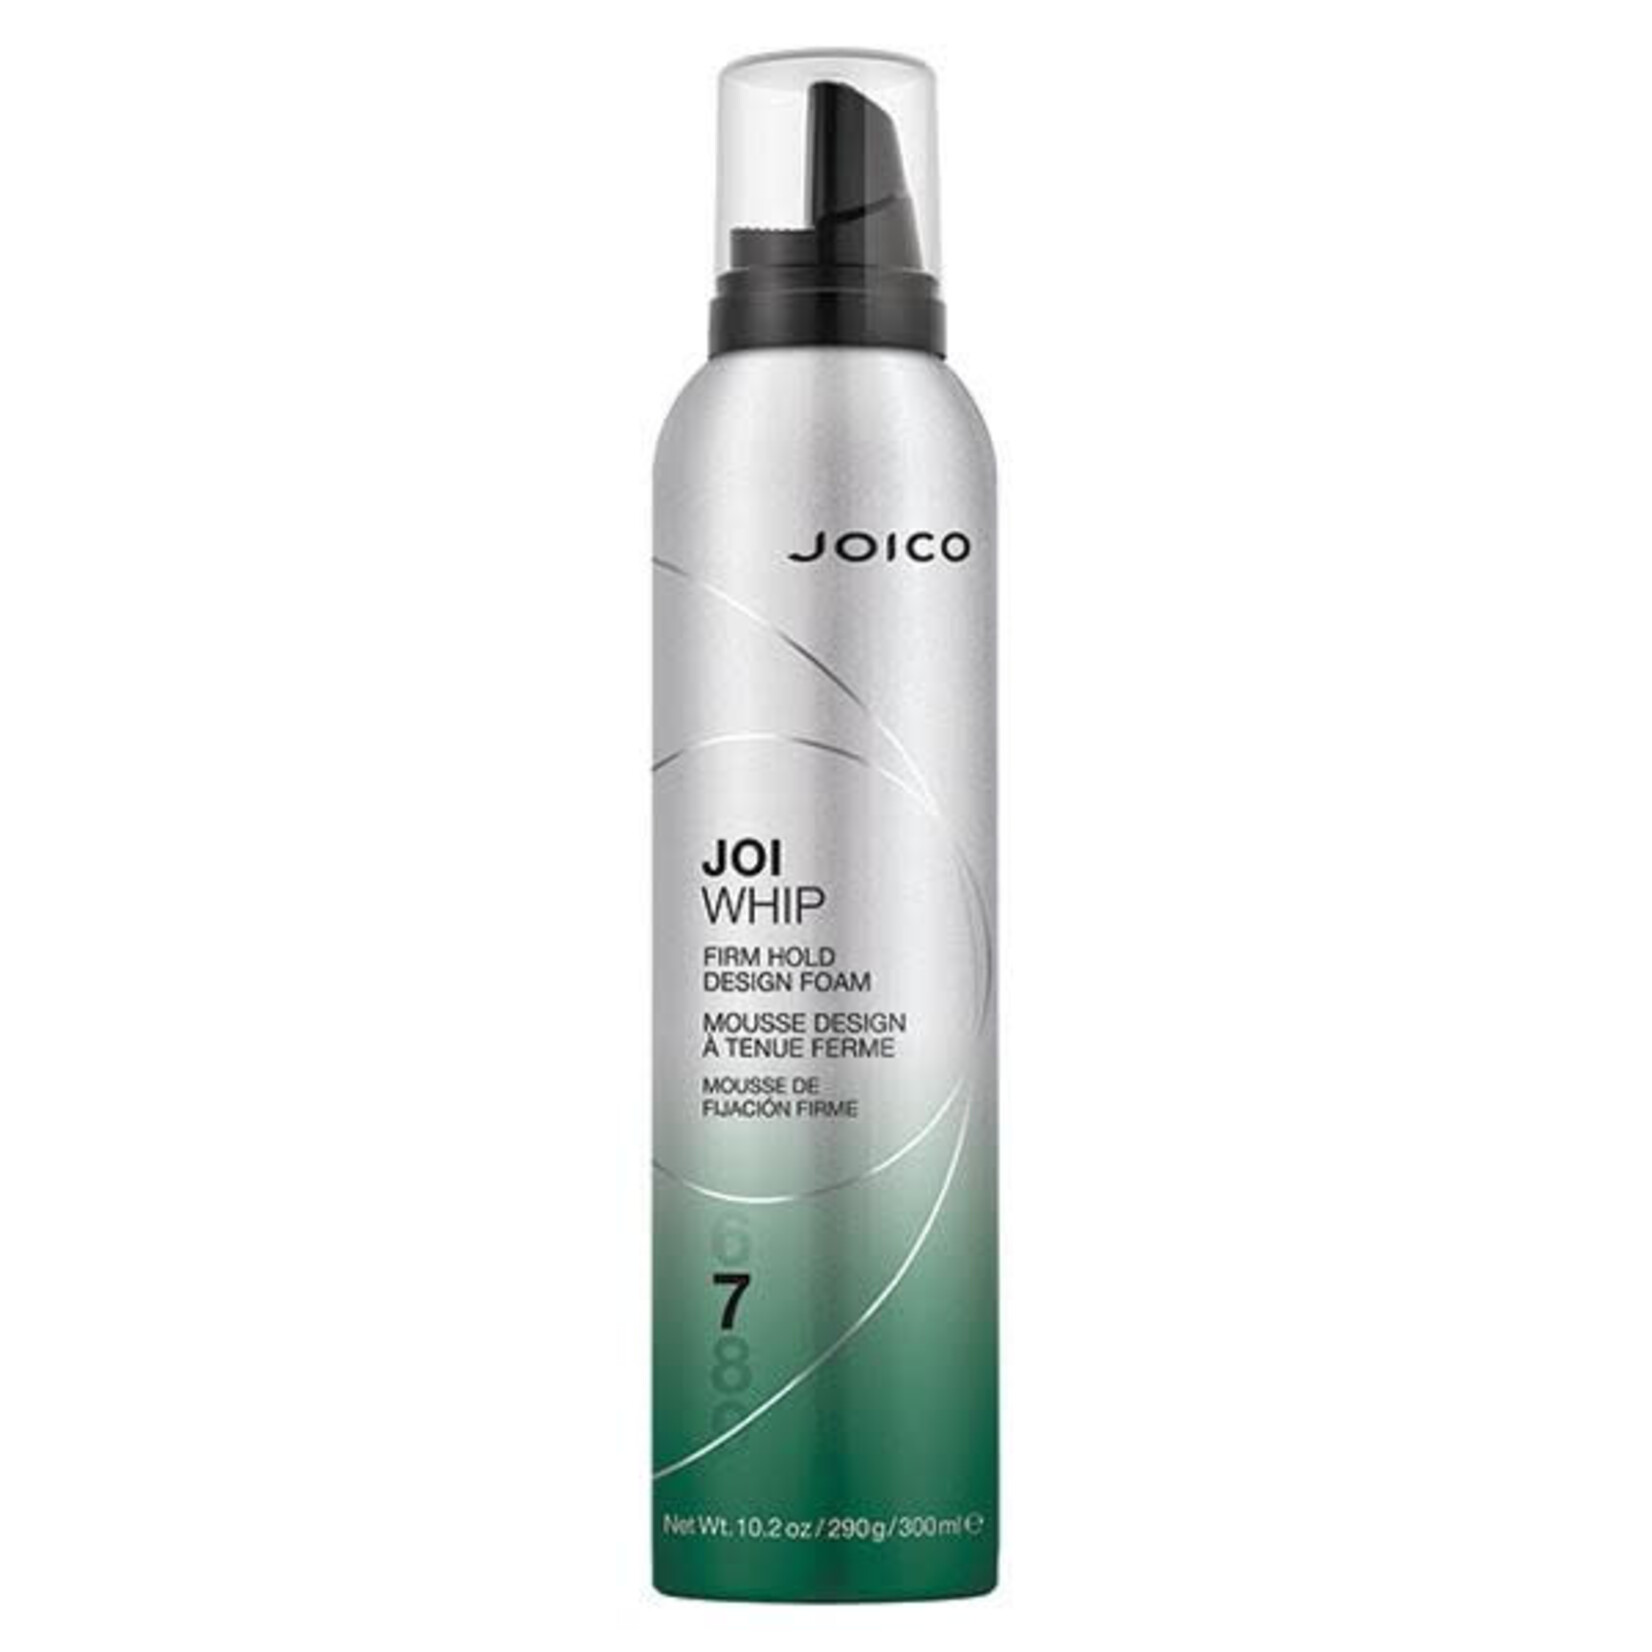 Joico Joico - Joiwhip - Firm Hold Foam 290g